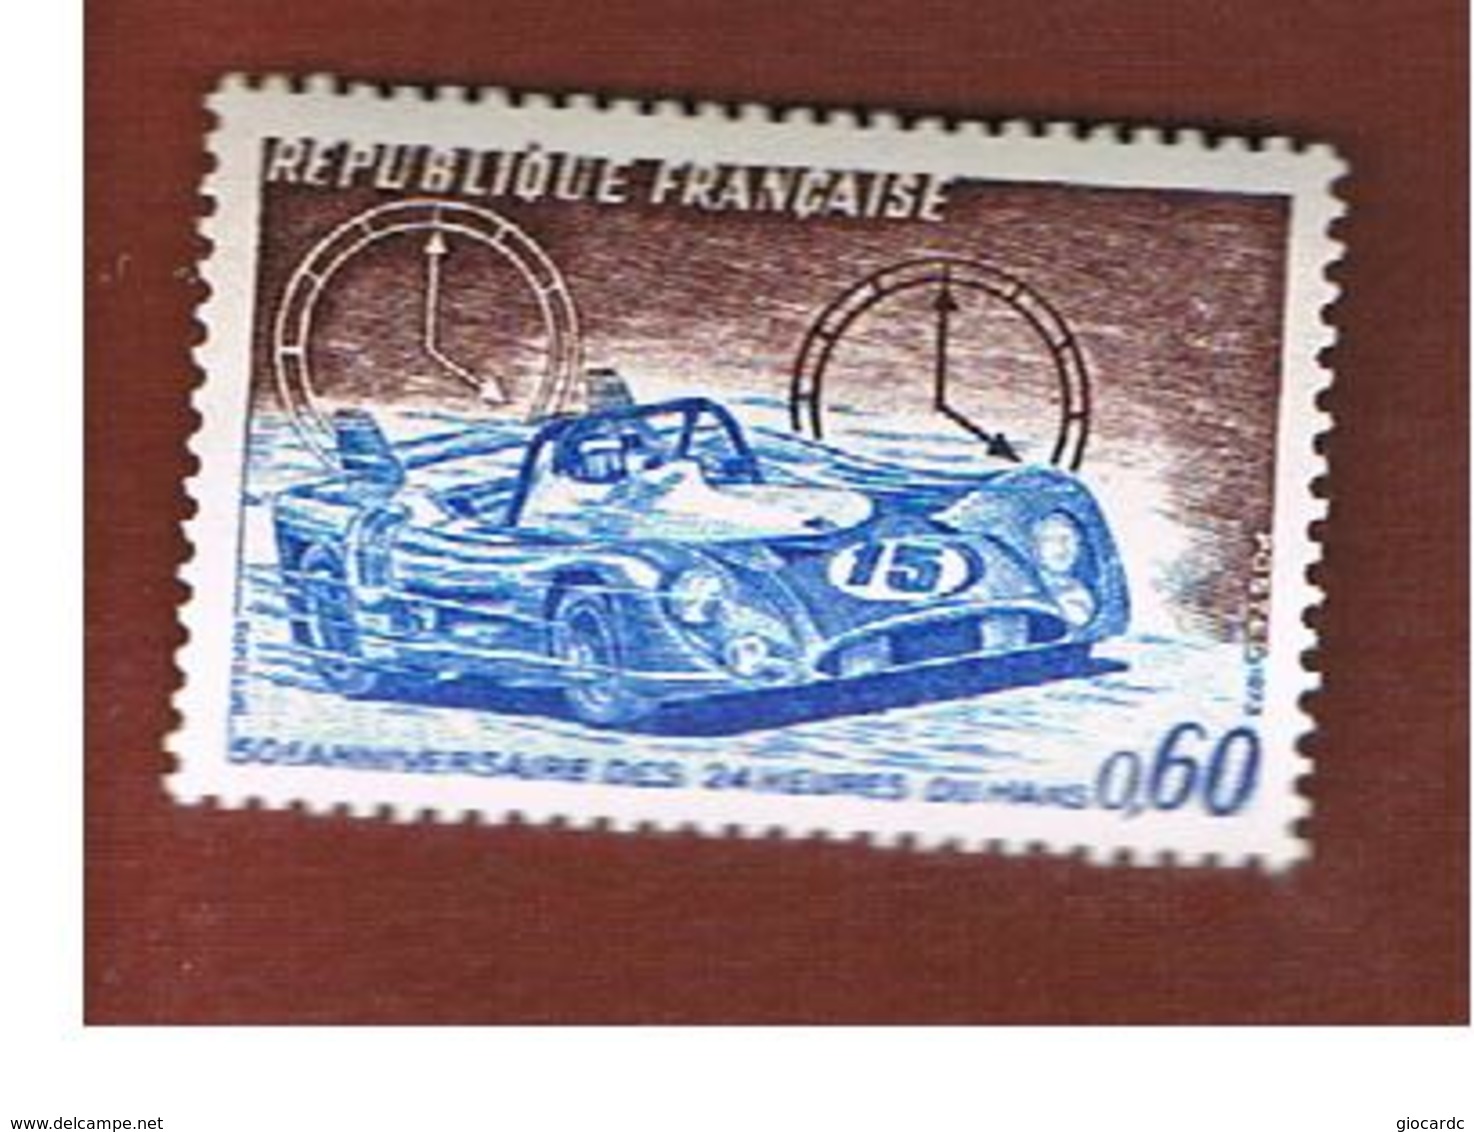 FRANCIA  (FRANCE)      -  SG 2010 -  1973 24 HOURS OF LE MANS  - MINT ** - Nuovi